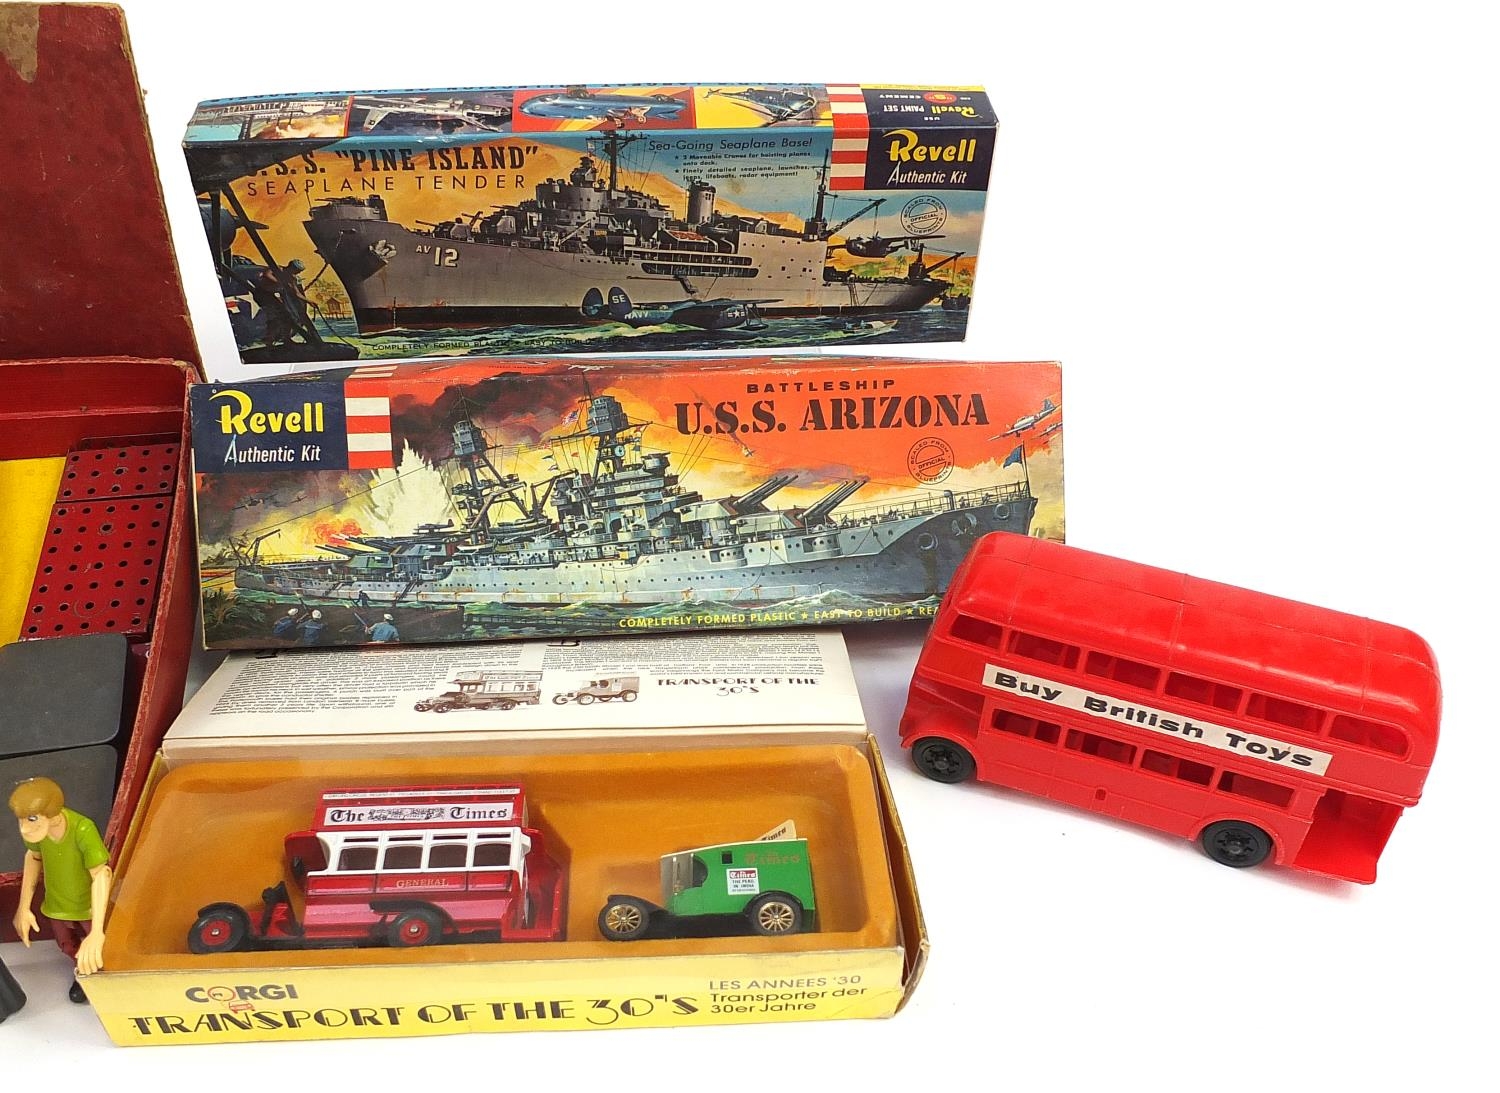 Vintage and later toys including Revell model ship kits, Star Wars figures and diecast vehicles - Image 4 of 4